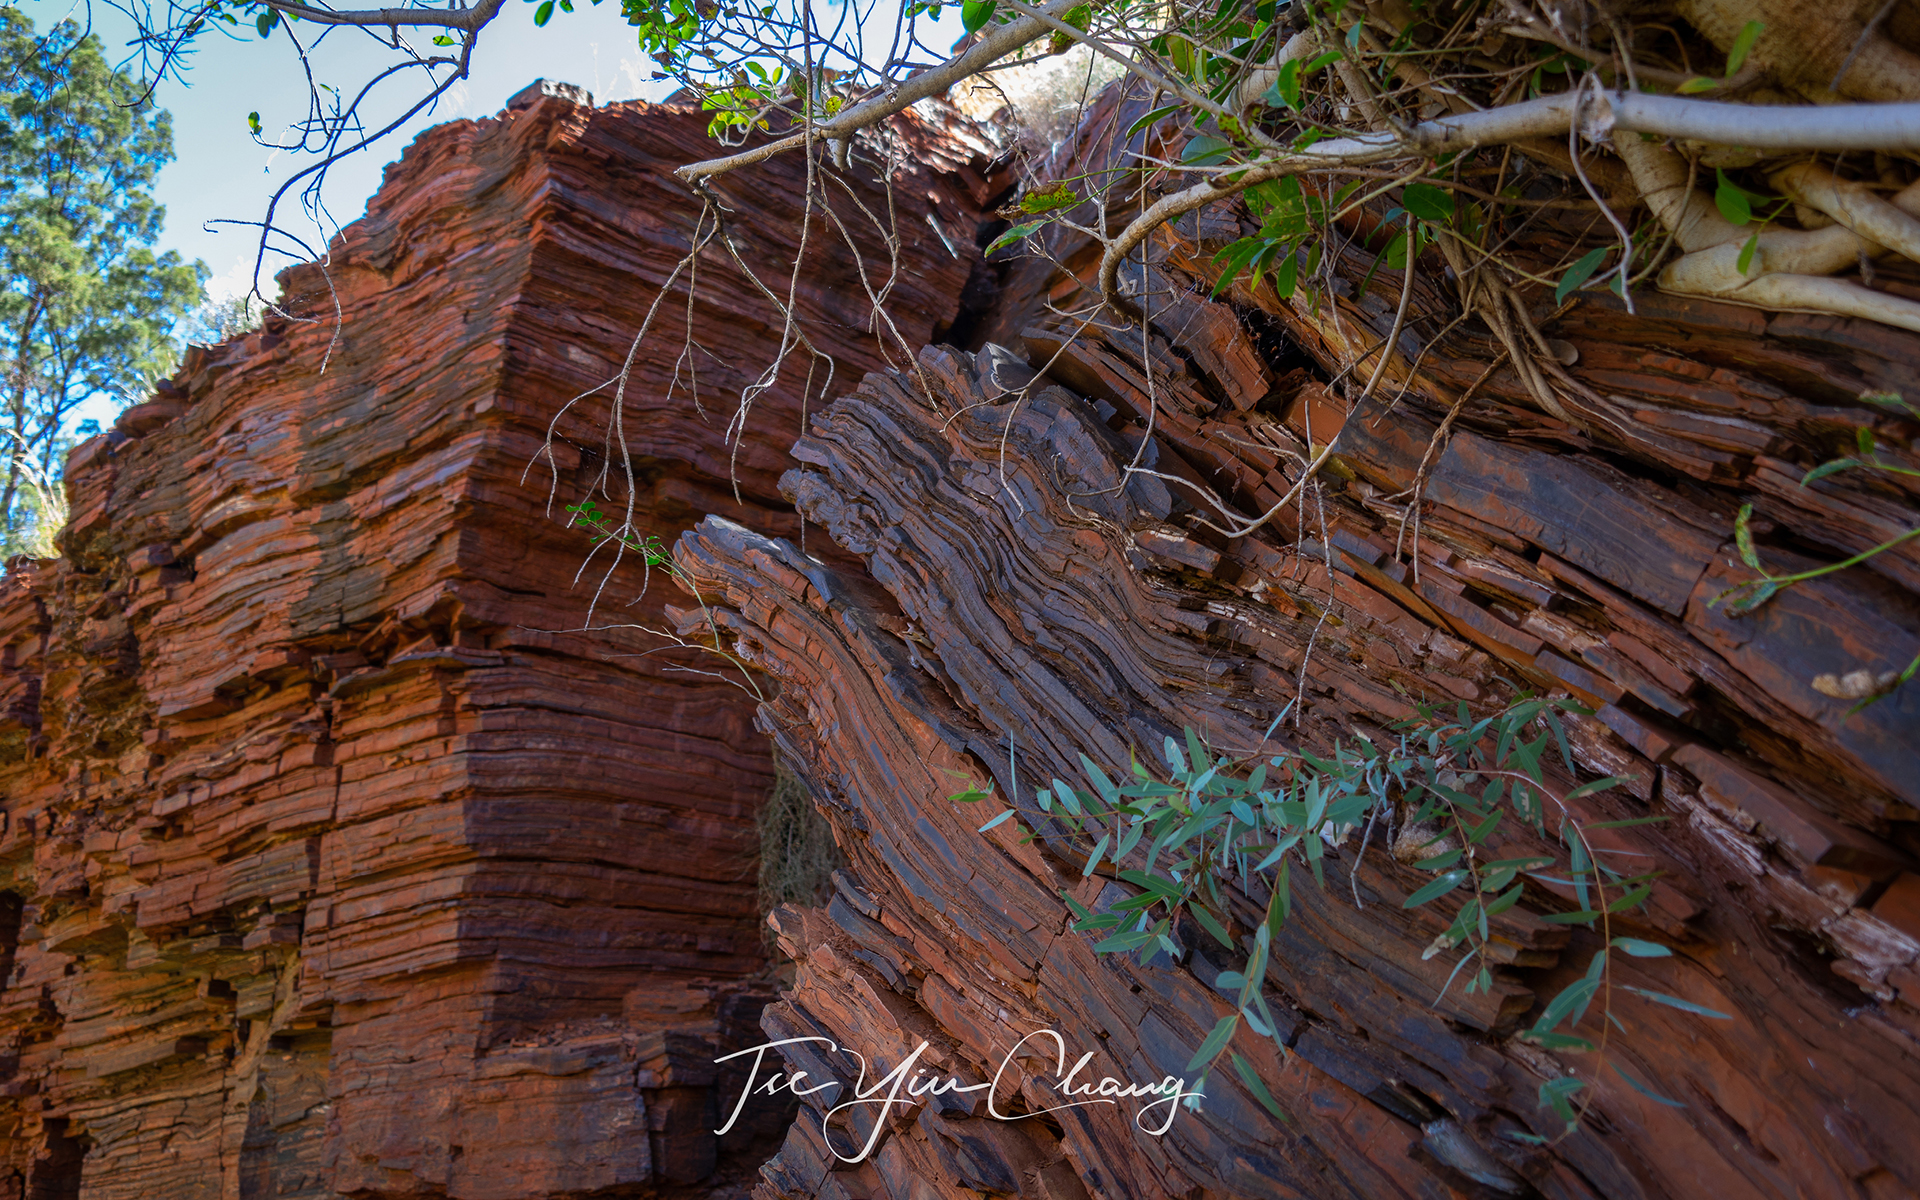 Unique iron-rich rock formation at Fortescue Falls 